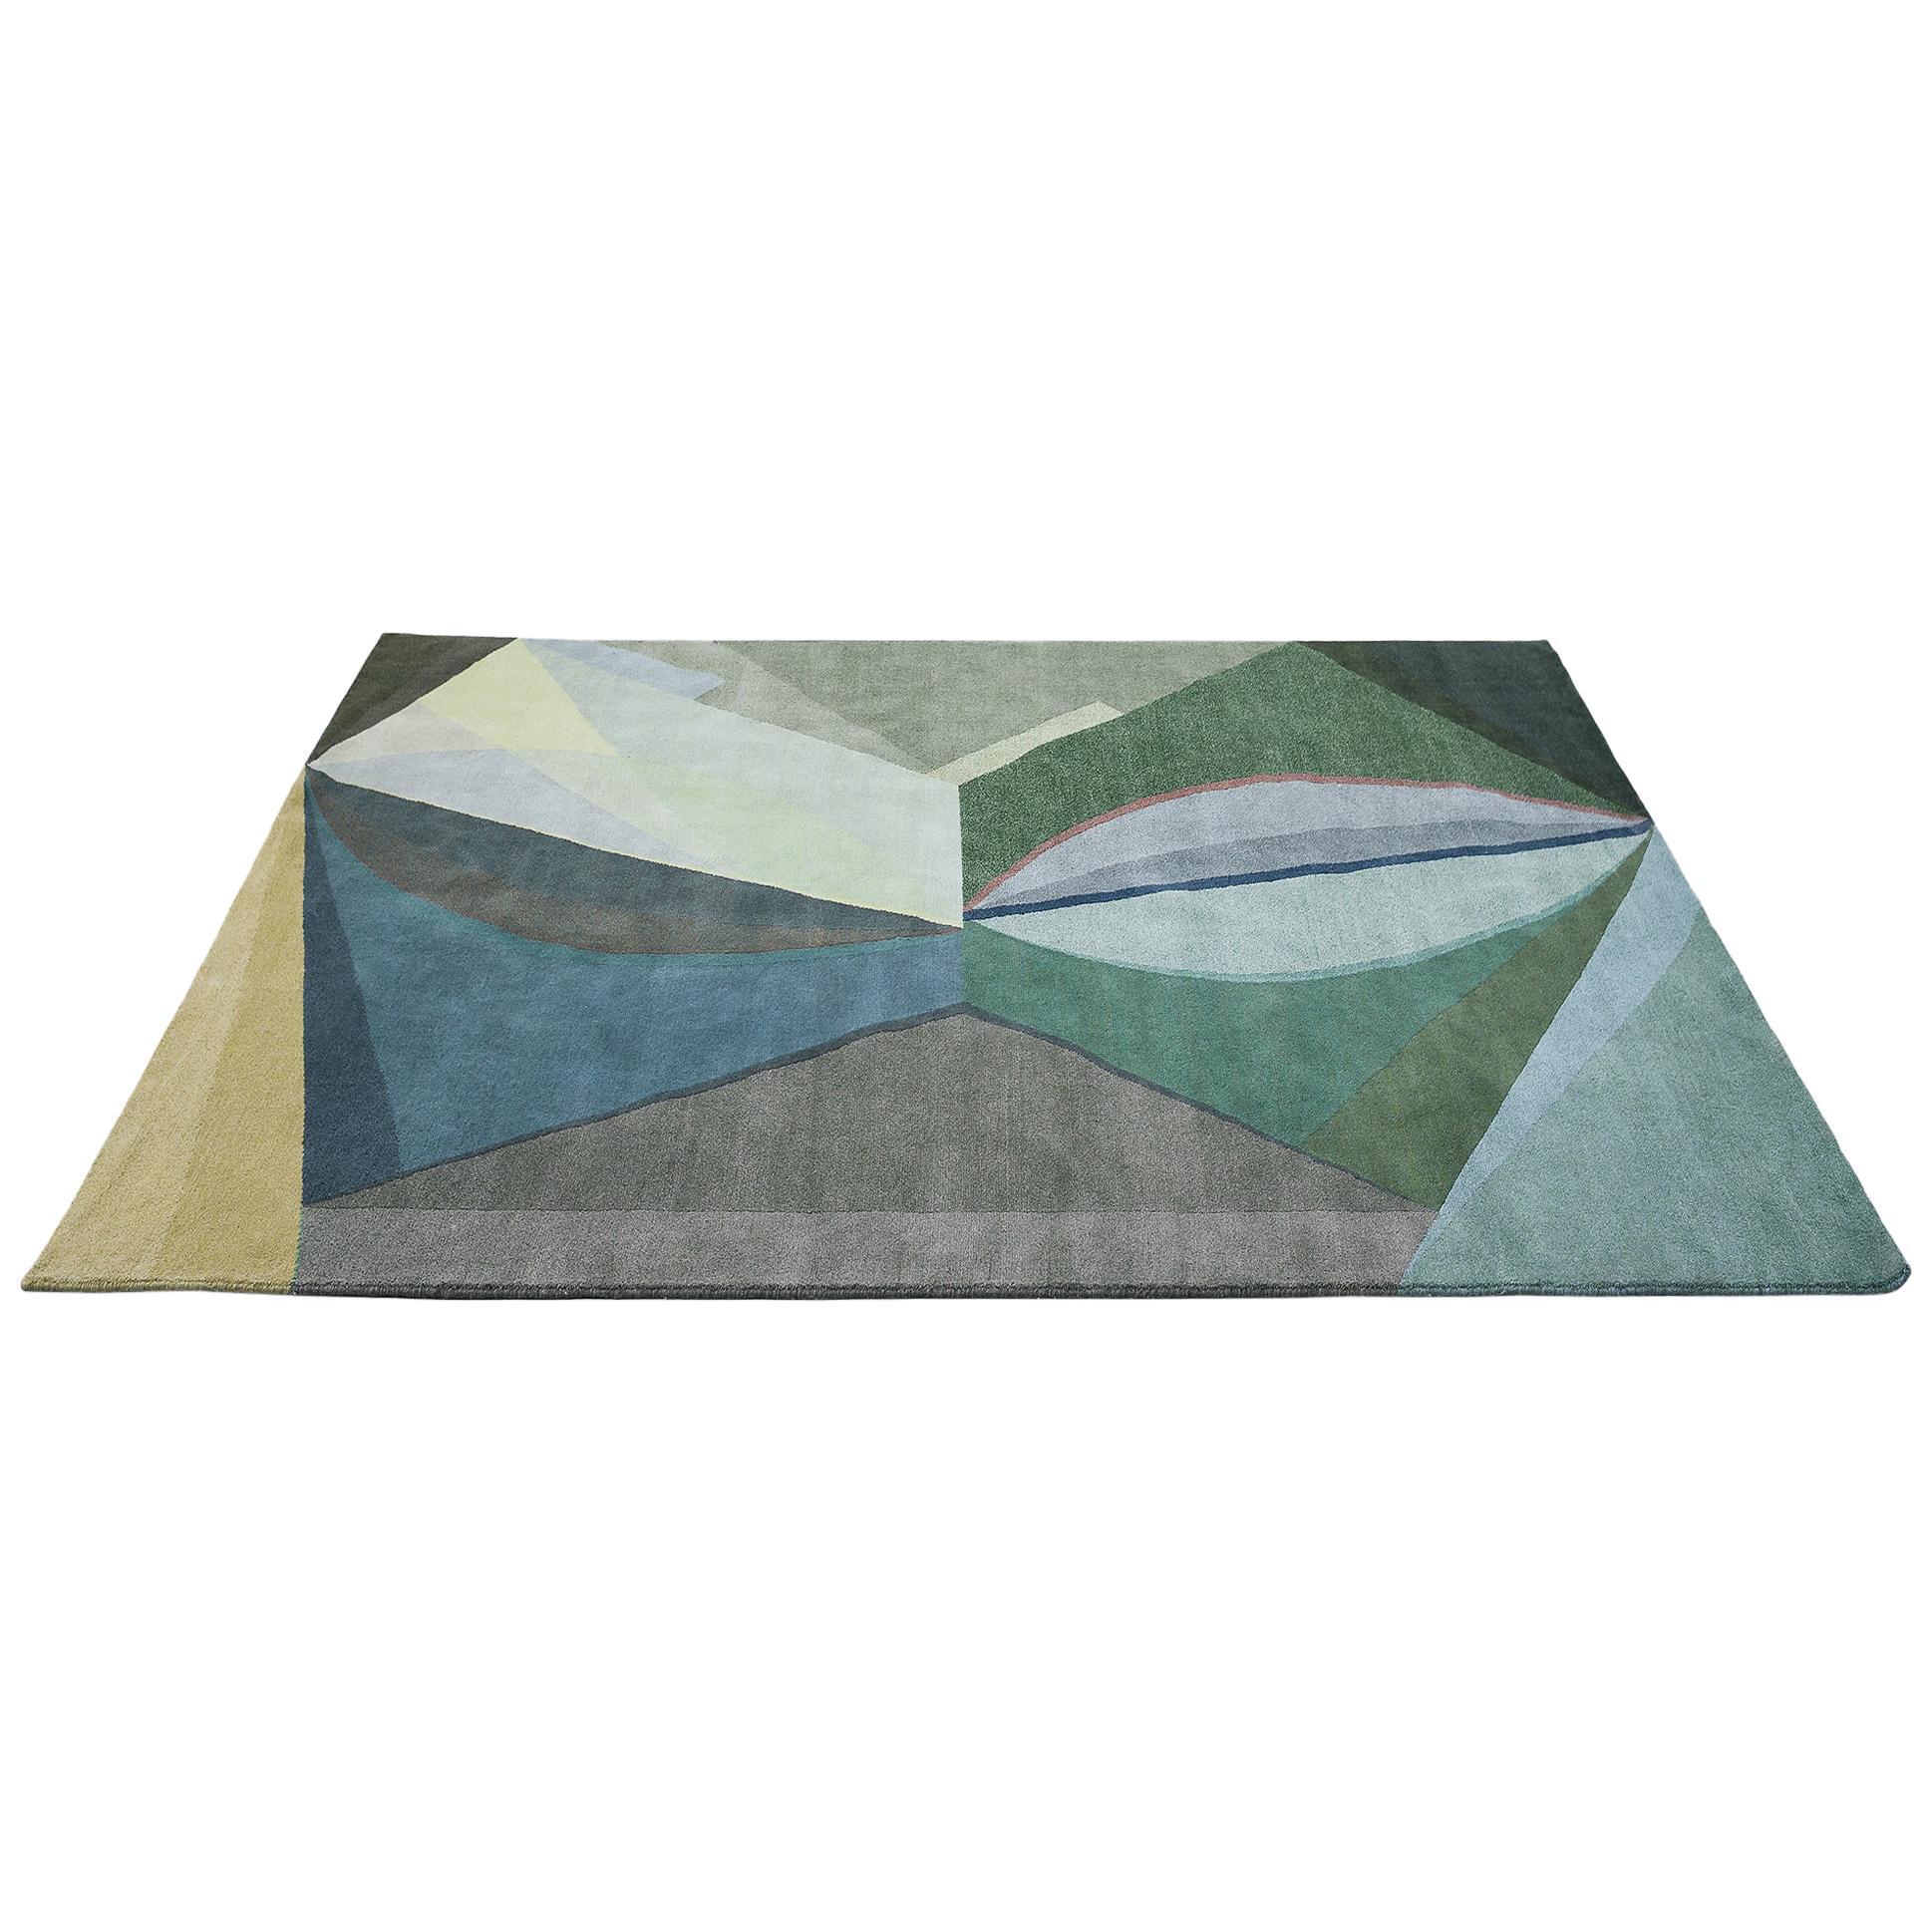 Tacchini Narciso Multicolor Handmade Rug in Wool by Umberto Riva